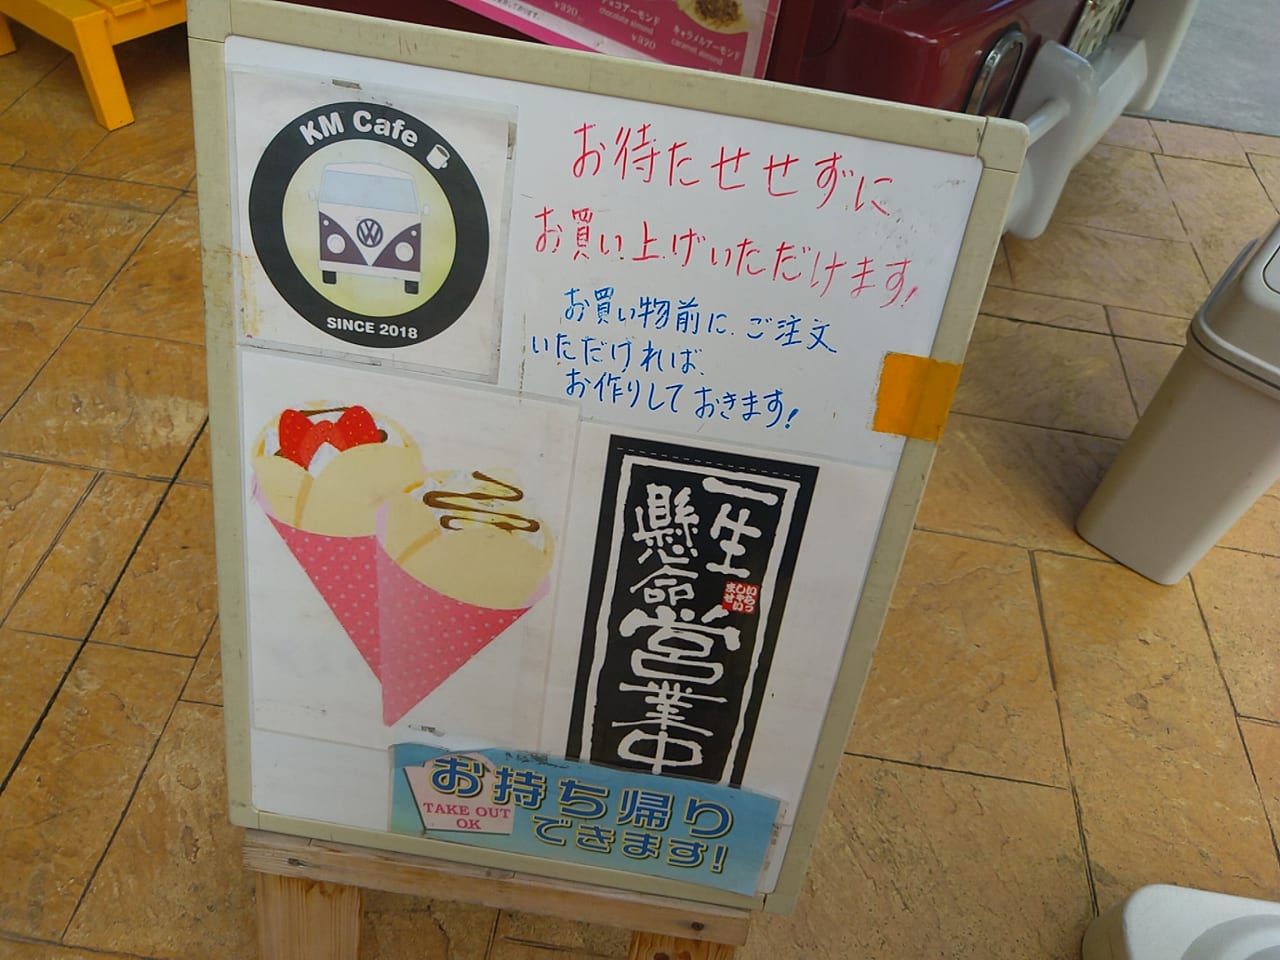 KMcafe(クレープ屋)